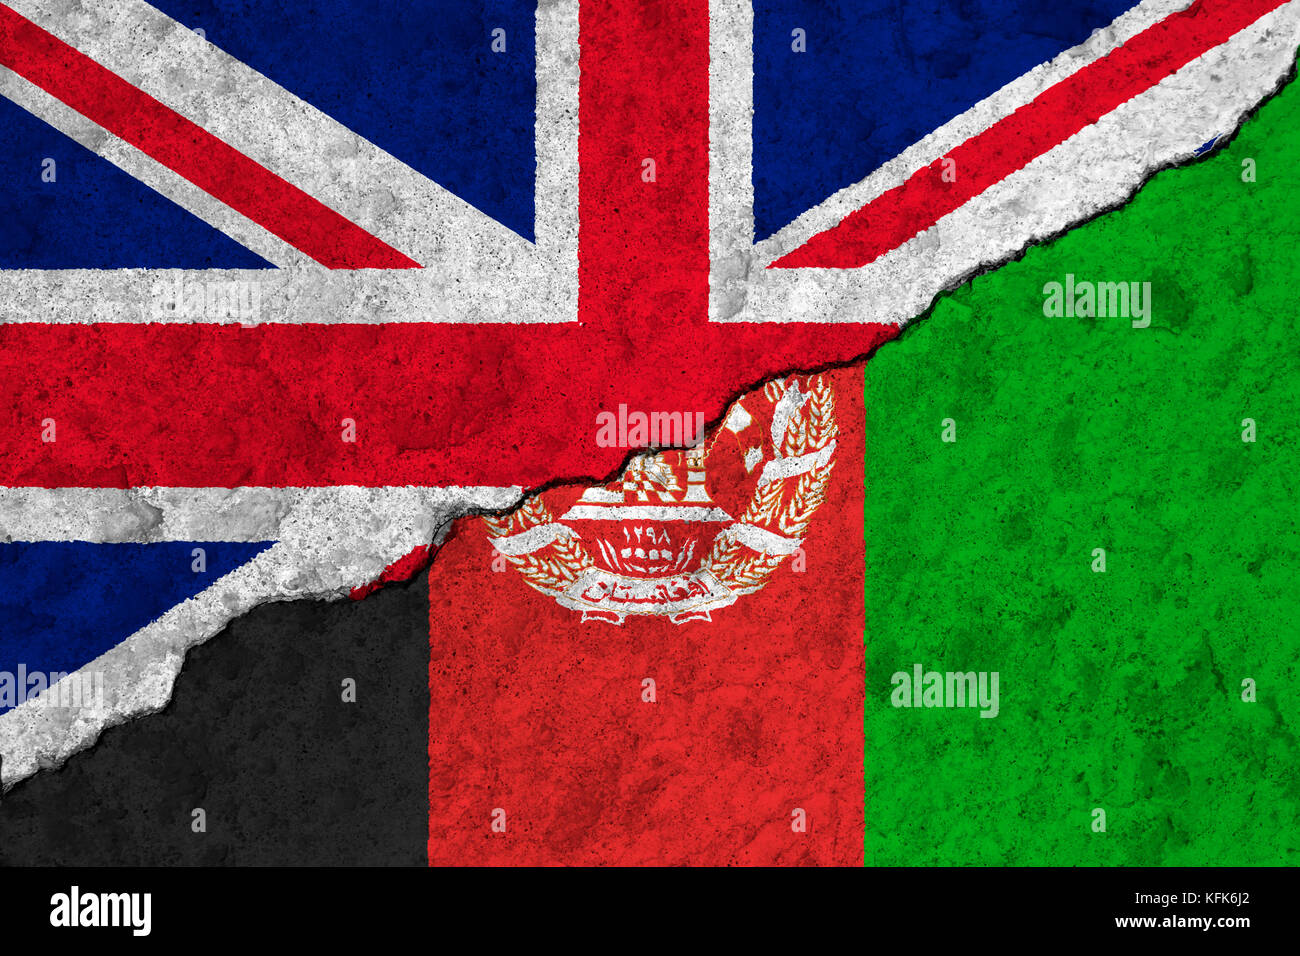 Flags of the United Kingdom and Afghanistan on a cracked concrete background Stock Photo